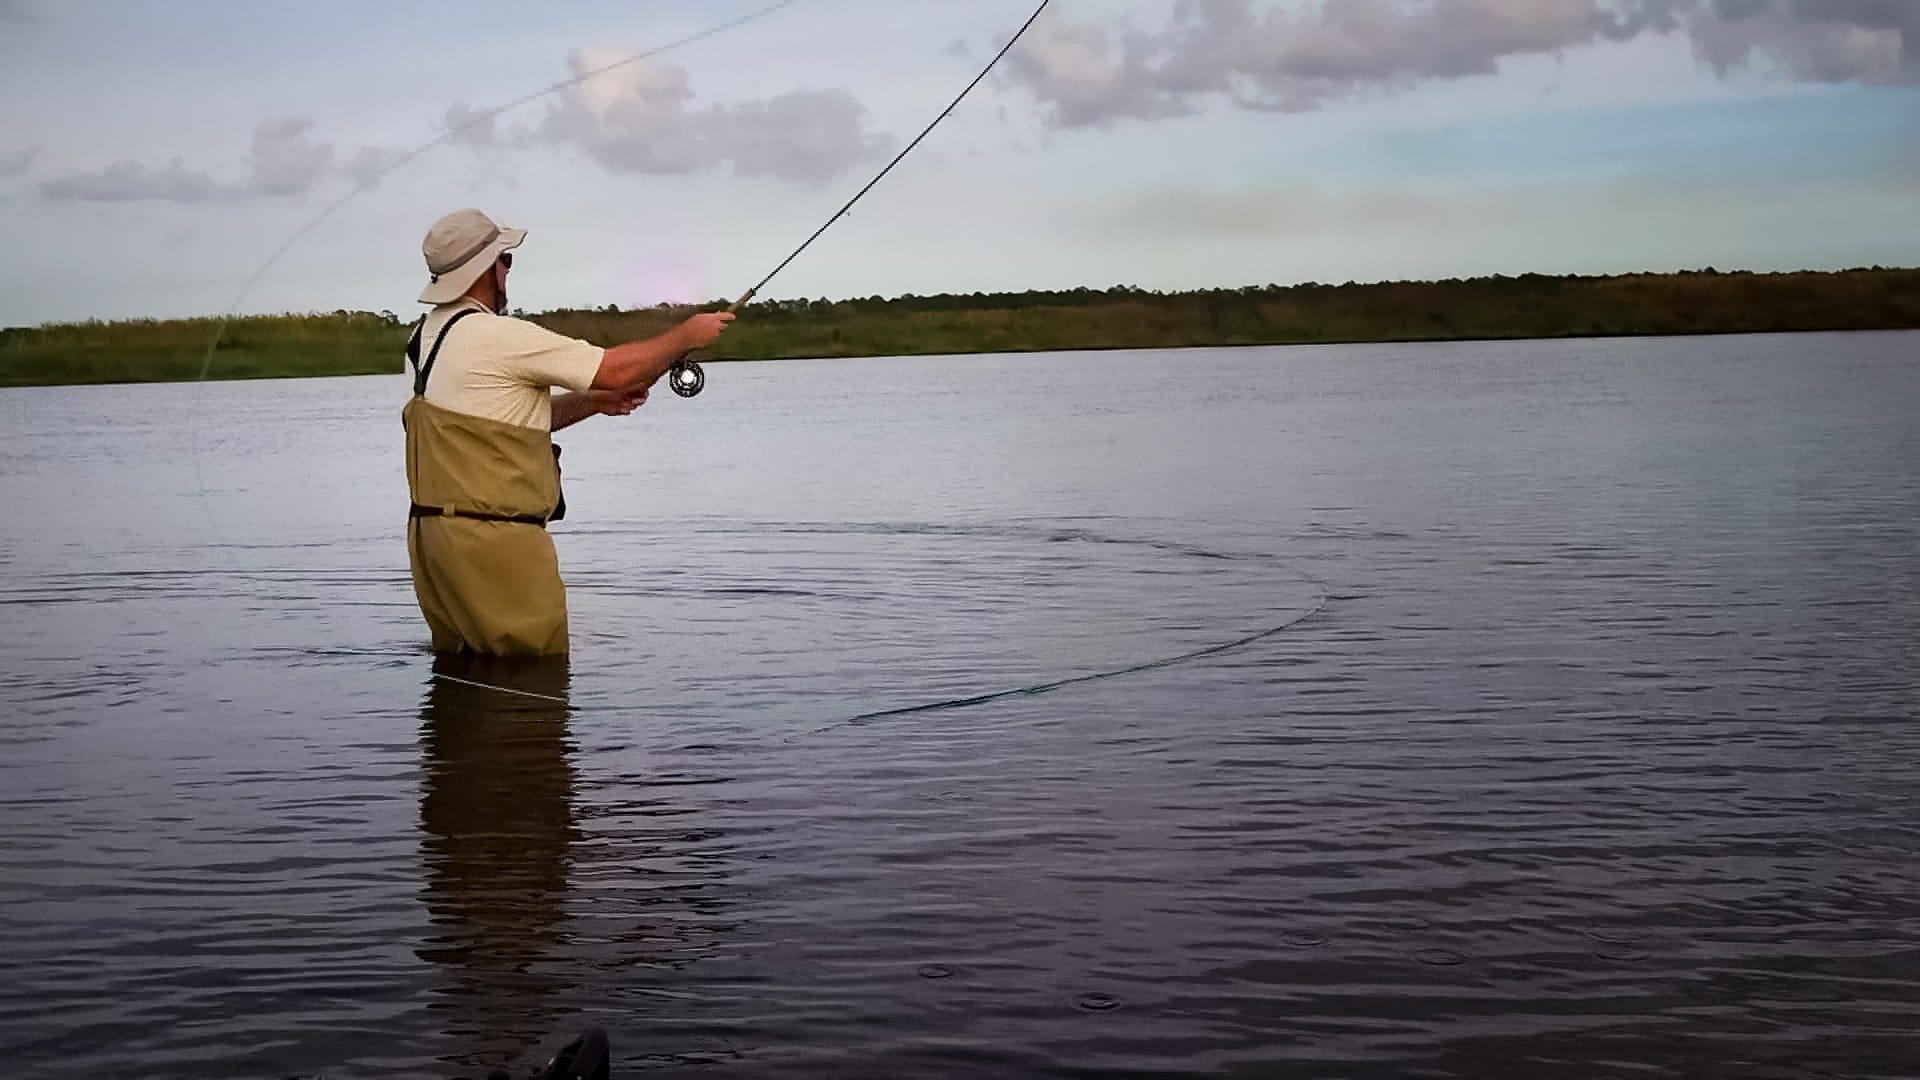 Spey Casting for Shad - Shad on the Fly